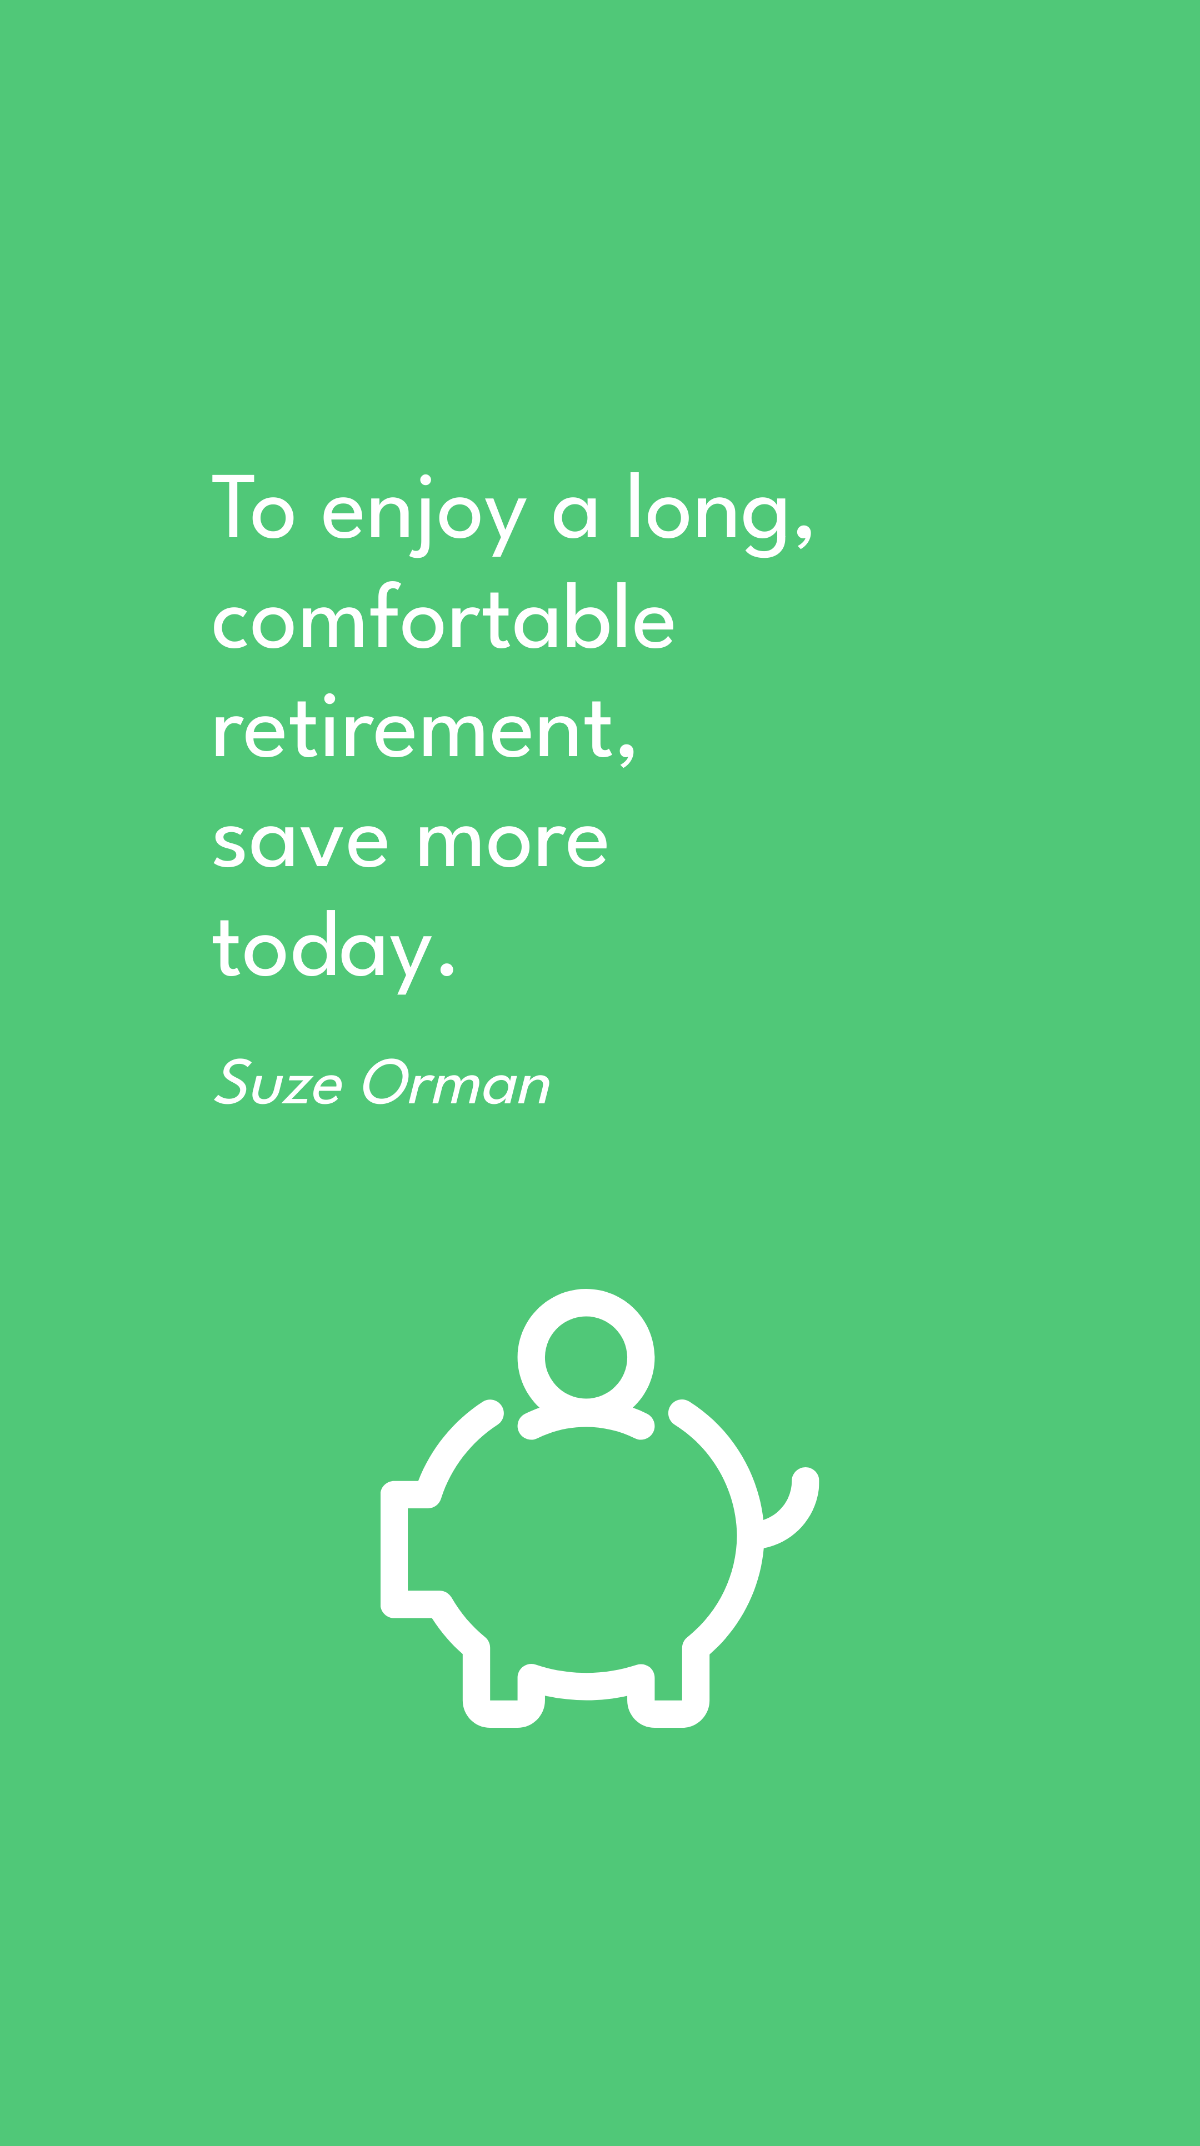 Free Suze Orman - To enjoy a long, comfortable retirement, save more today. Template